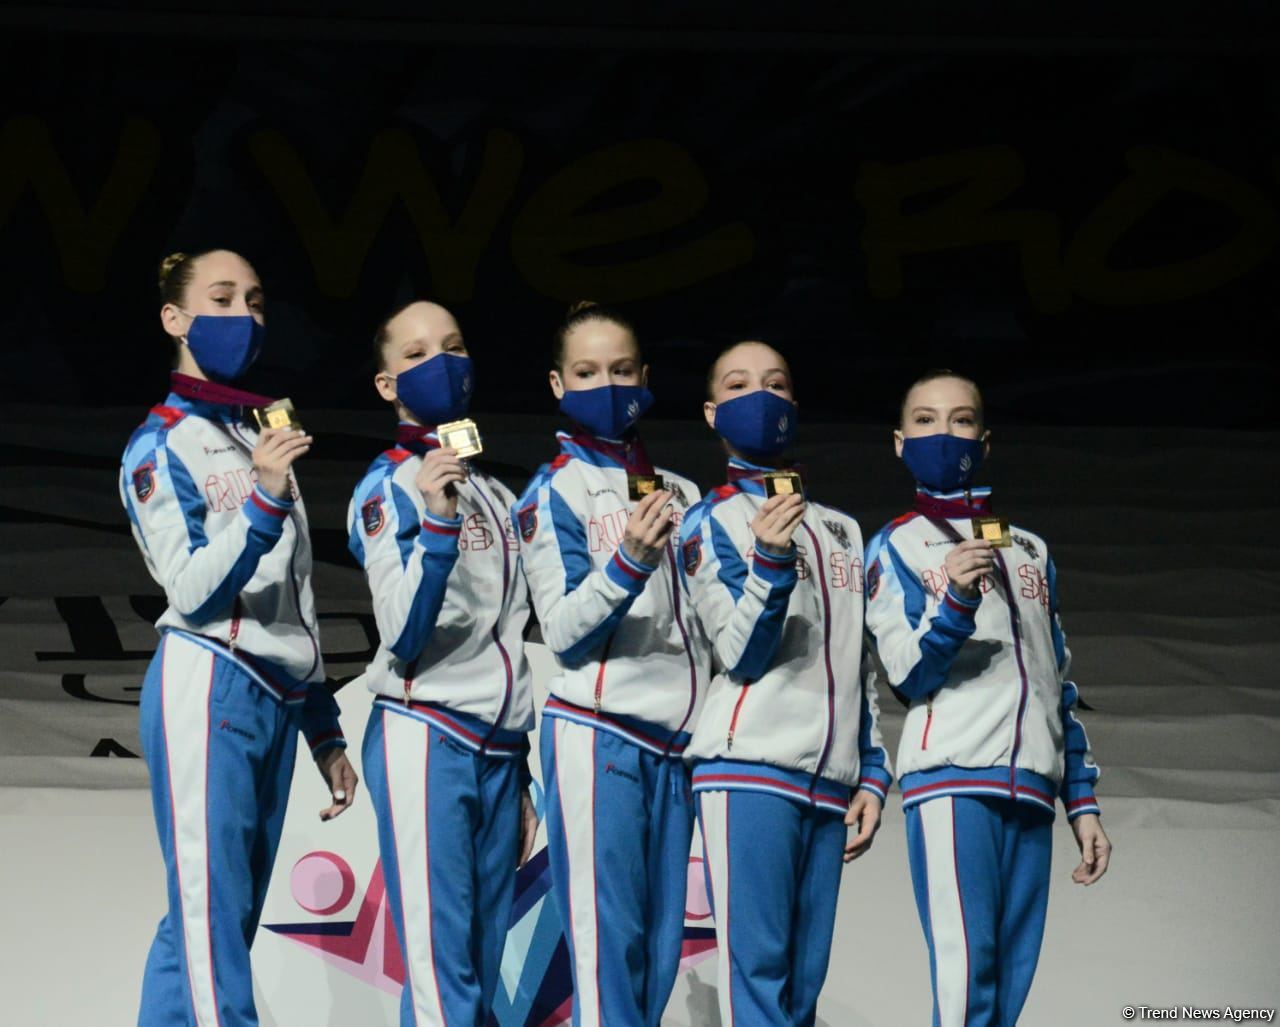 Baku holds awards ceremony of winners and prize-winners in aerobic dance program of Aerobic Gymnastics World Age Group Competition in Baku (PHOTO)